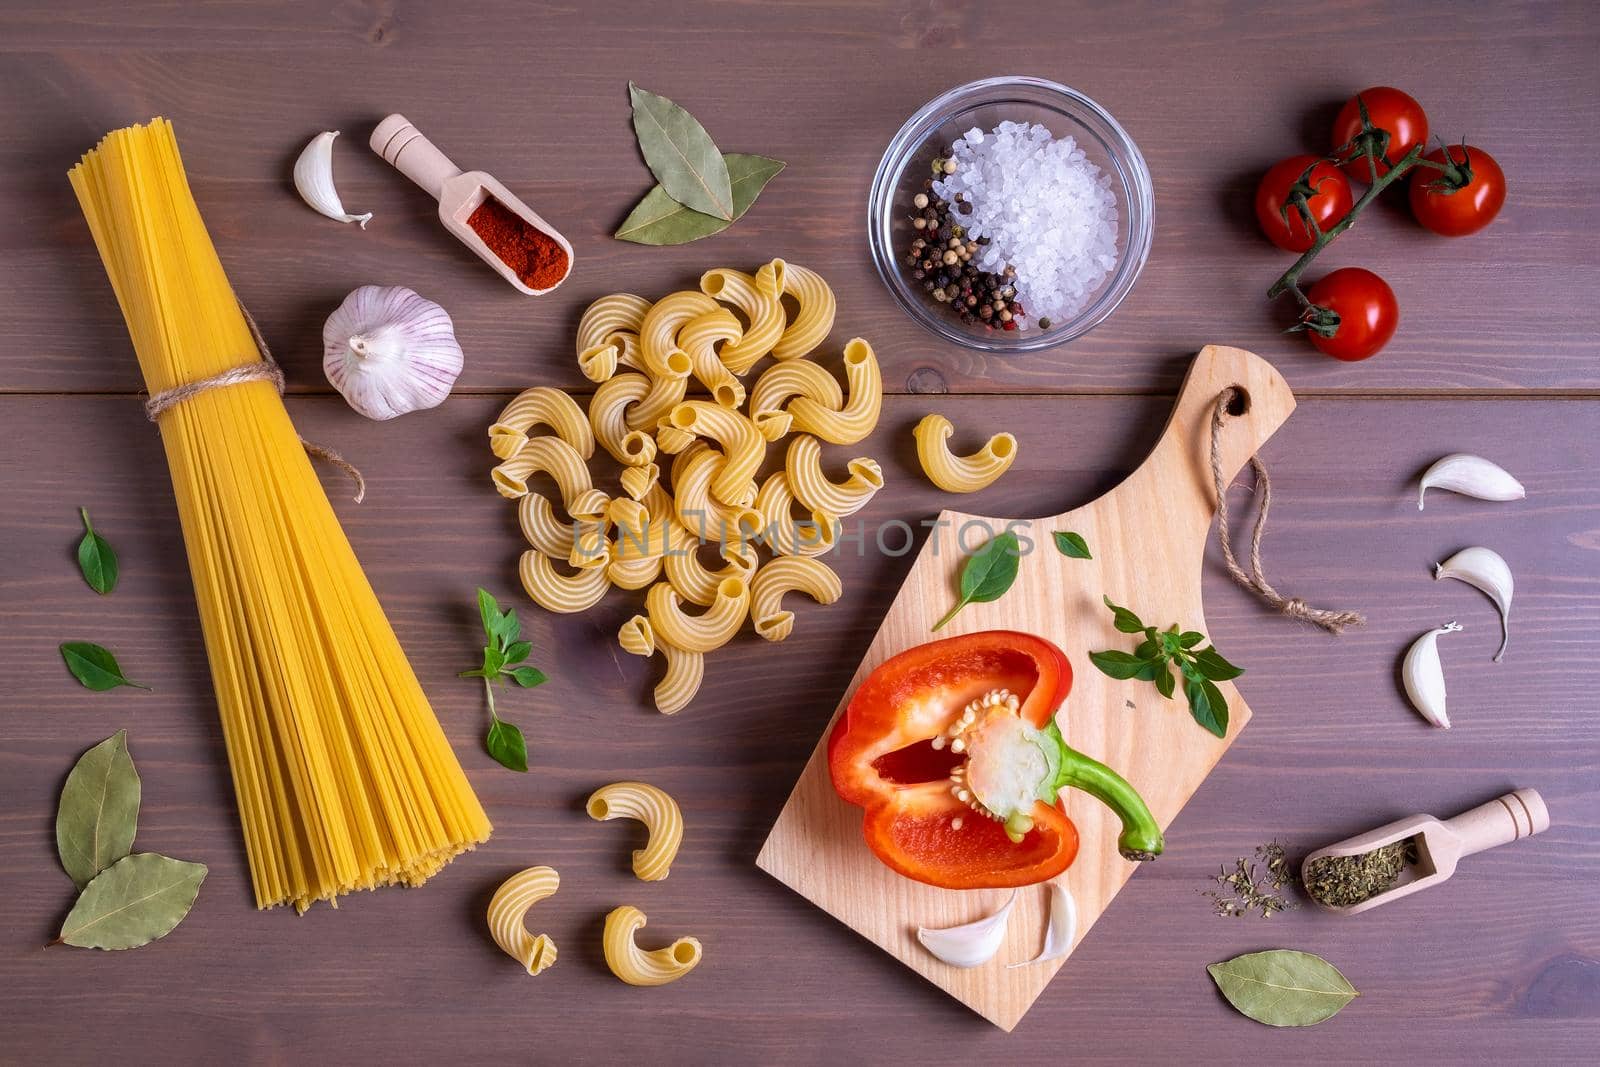 Close-up top view of ingredients for making Italian pasta. Healthy and wholesome food concept. Selective focus.